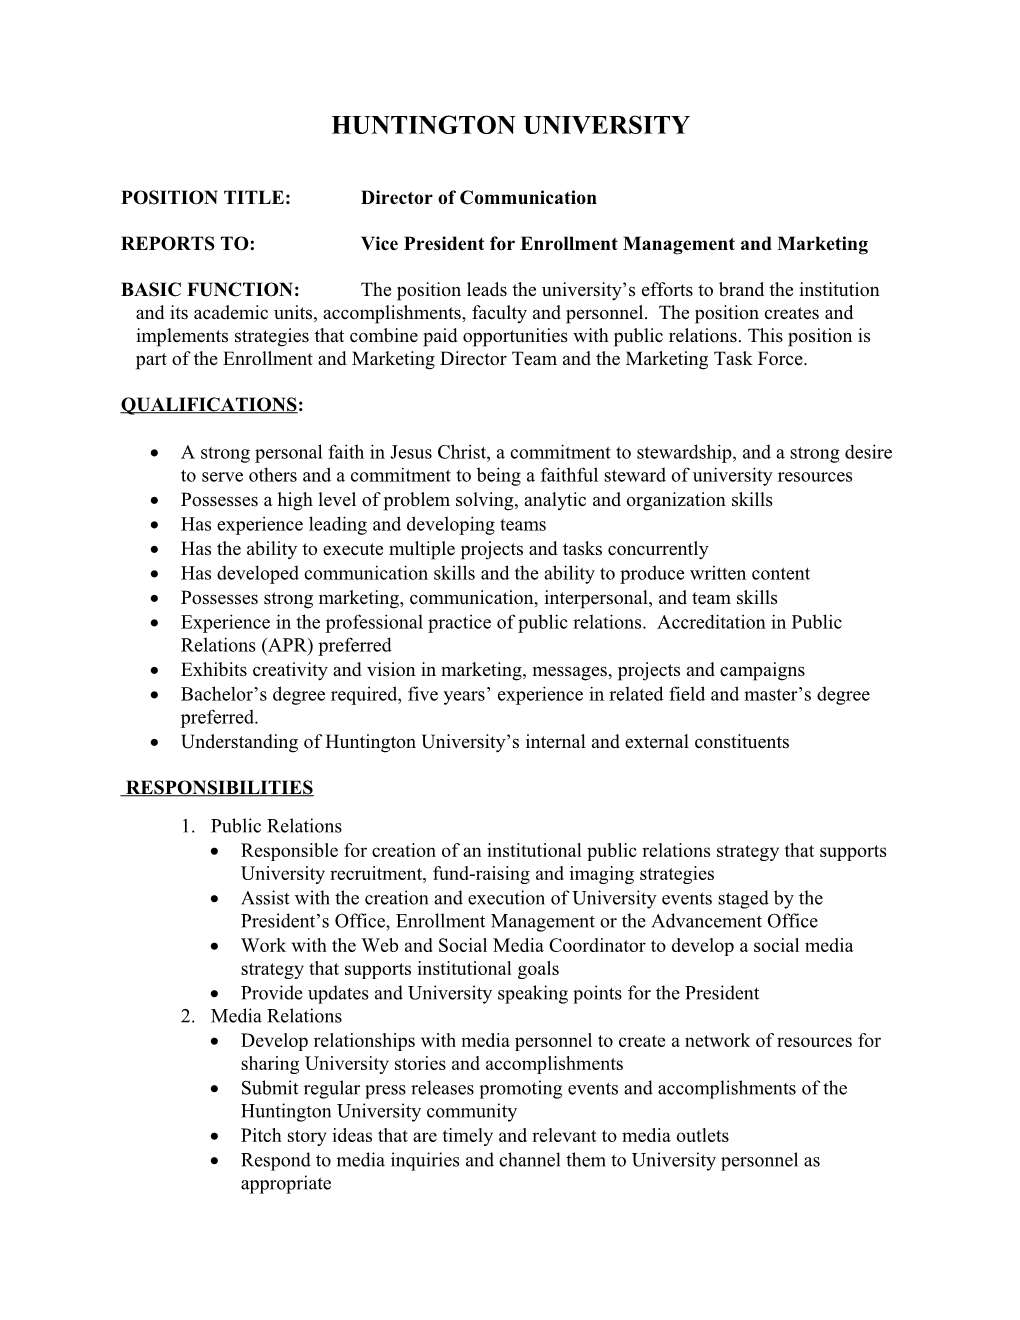 POSITION TITLE:Director of Communication